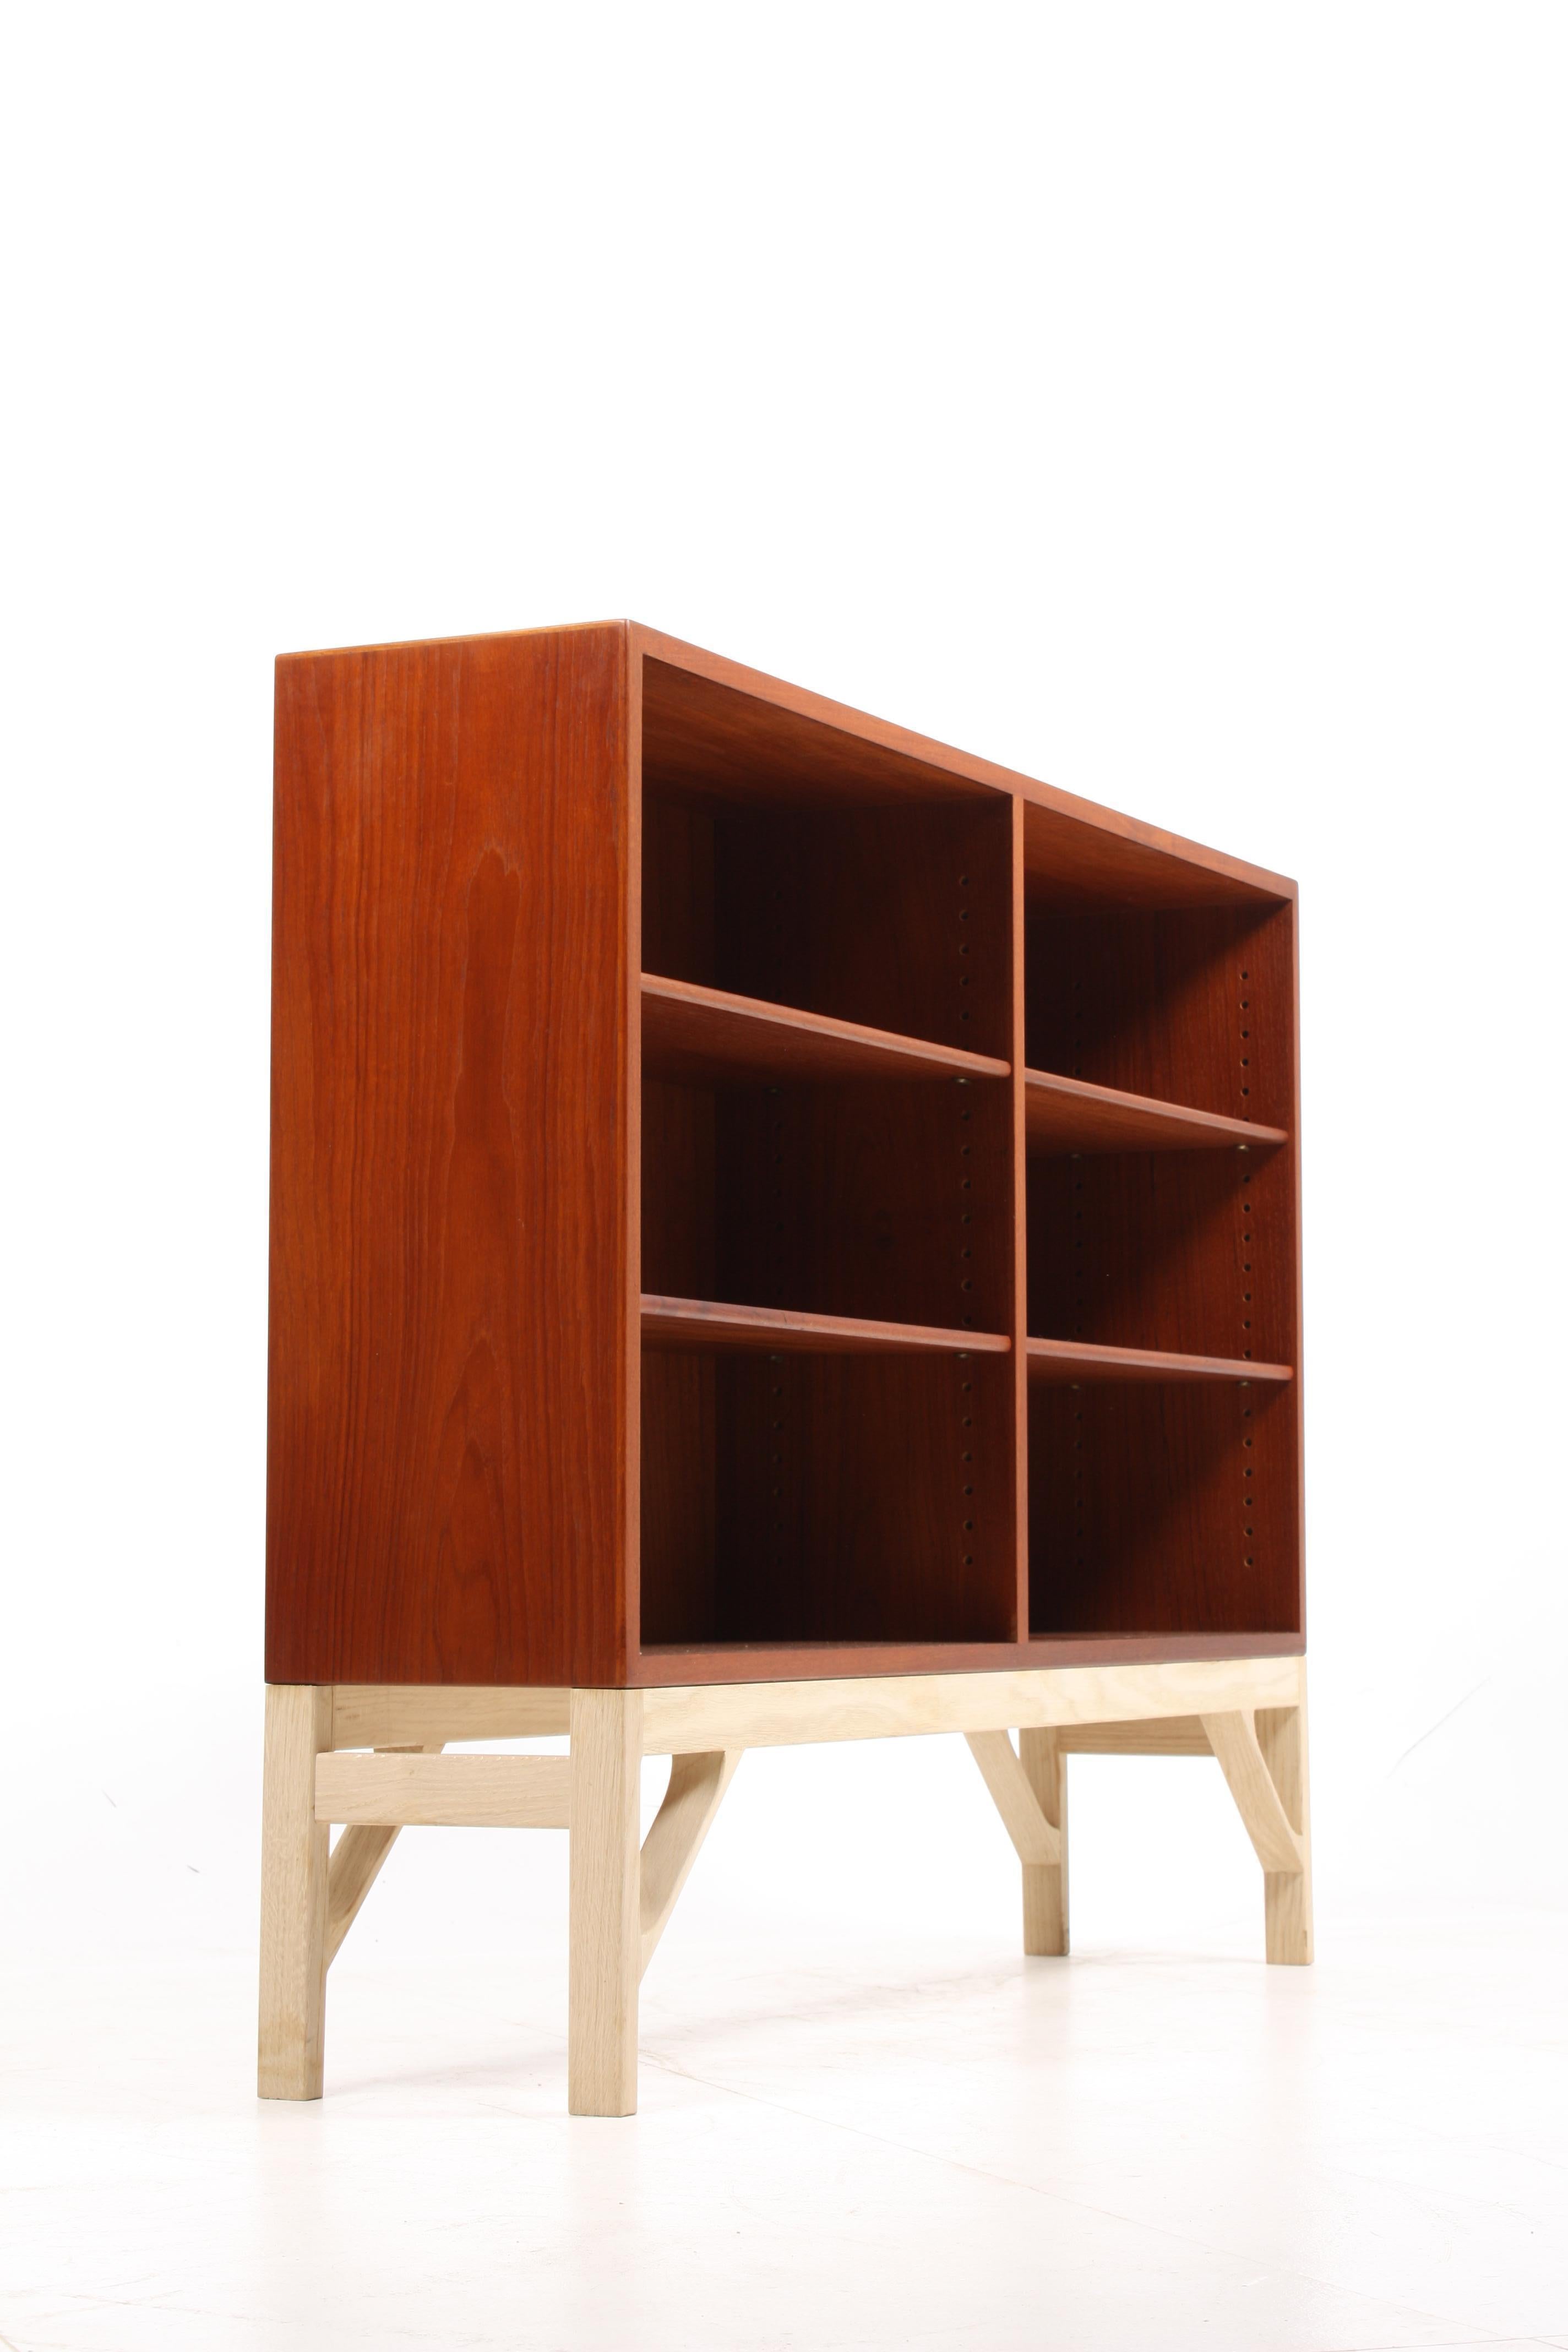 Low China bookcase in oiled teak on a soap finished oak base. Designed by MAA. Børge Mogensen in 1958, this piece is made by CM Madsen cabinetmakers Denmark in the 1960s. Great original condition.